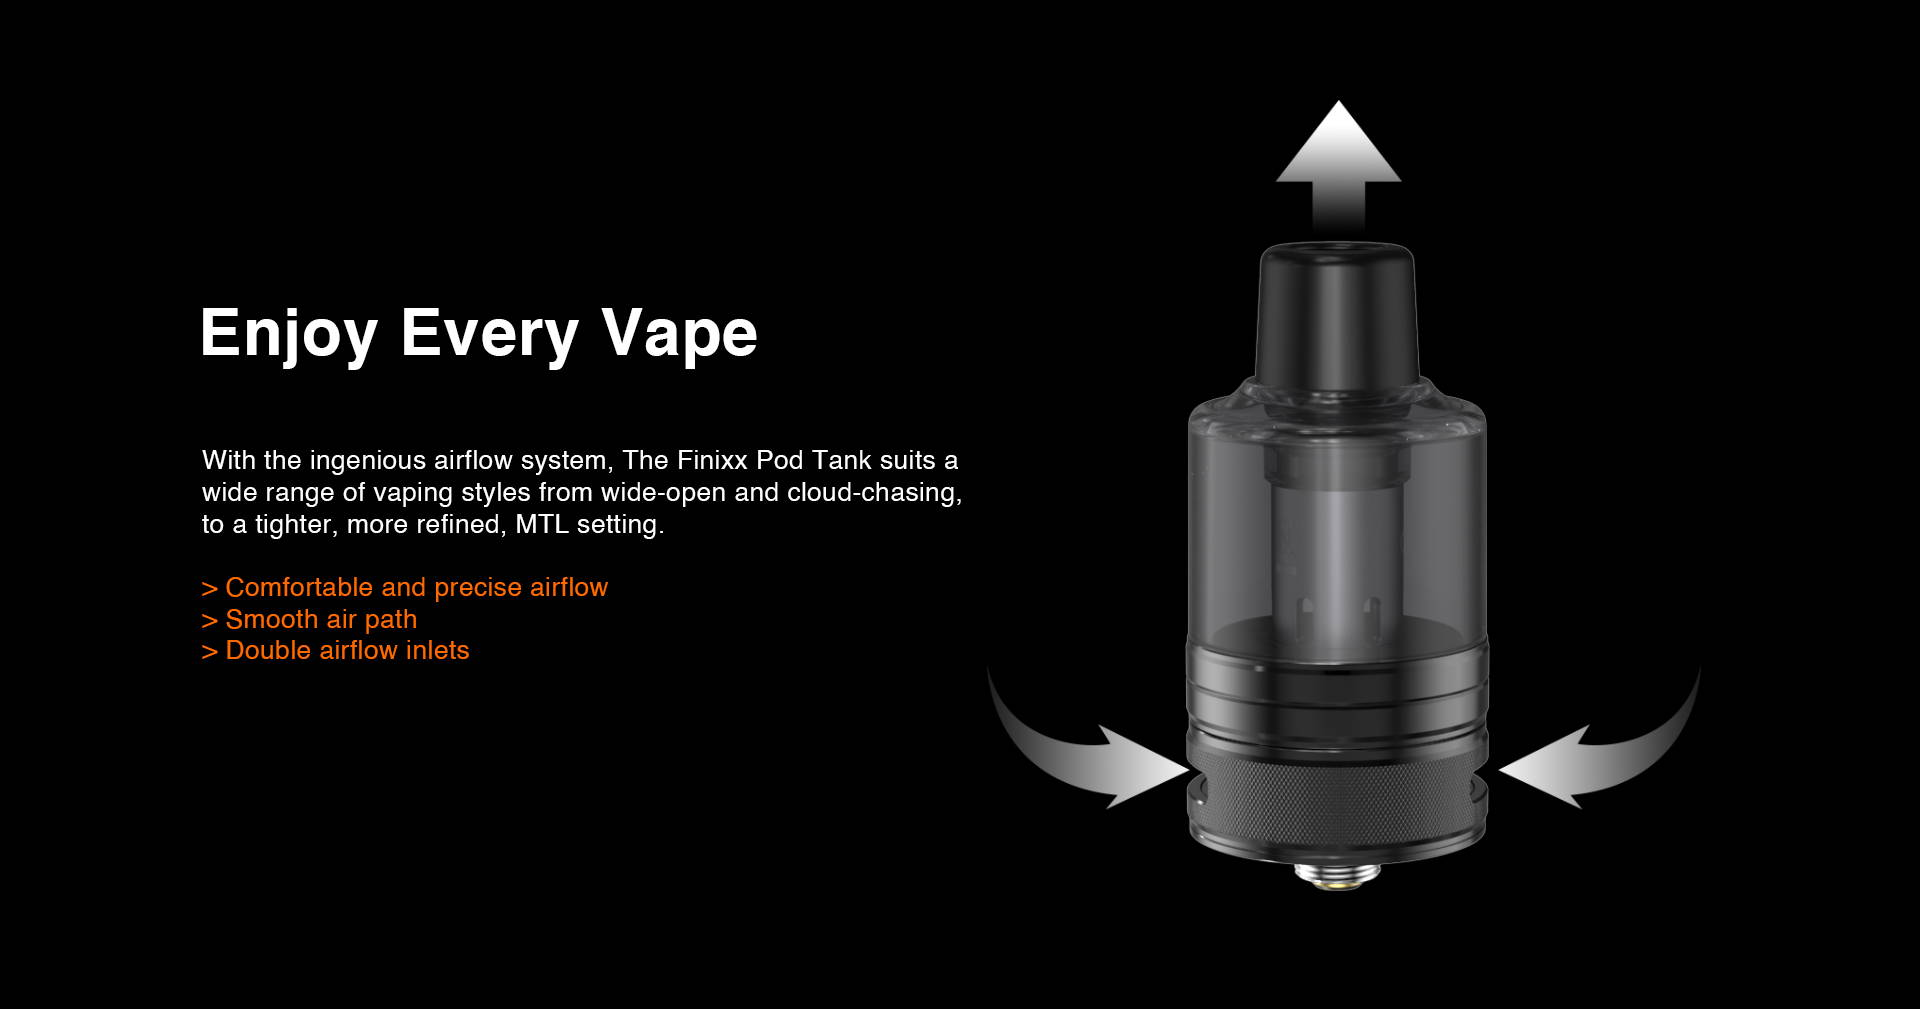 With the ingenious airflow system, Finixx Pod Tank suits a wide range of vaping styles from wide-open and cloud-capable, to a tighter, more refined, MTL setting.  > Comfortable and precise airflow > Smooth air path > Double unlimited airflow hole